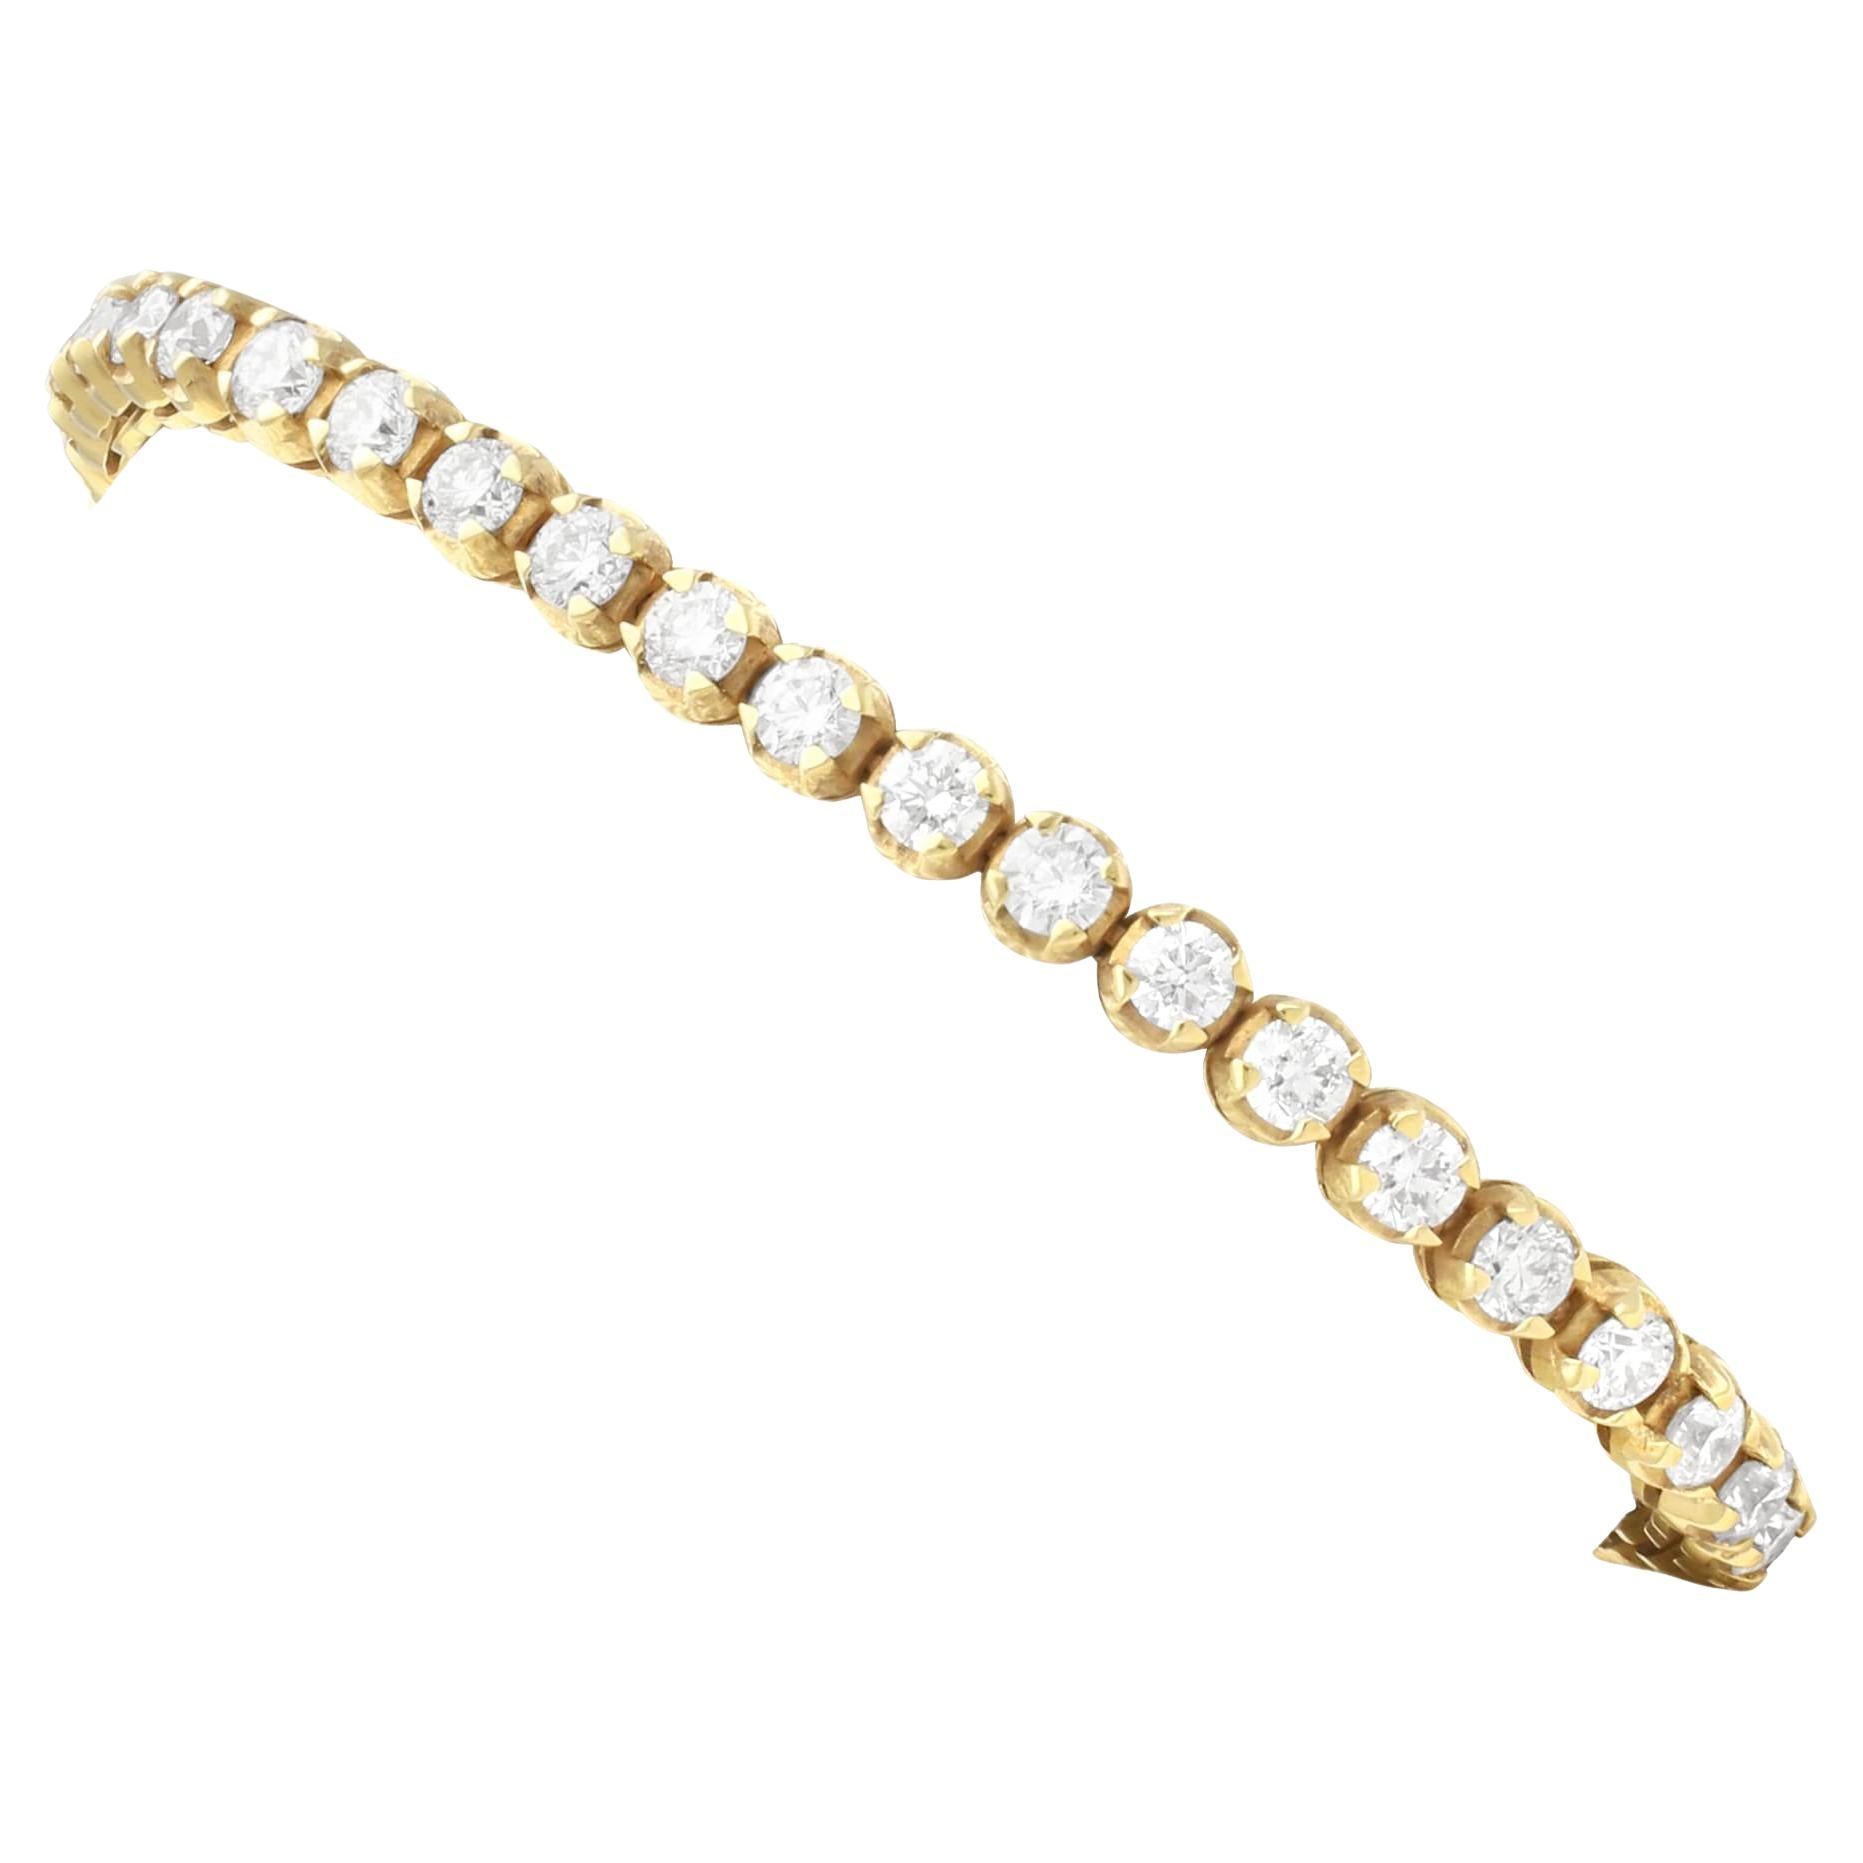 Contemporary 6.36 Carat Diamond and Yellow Gold Tennis Bracelet For Sale